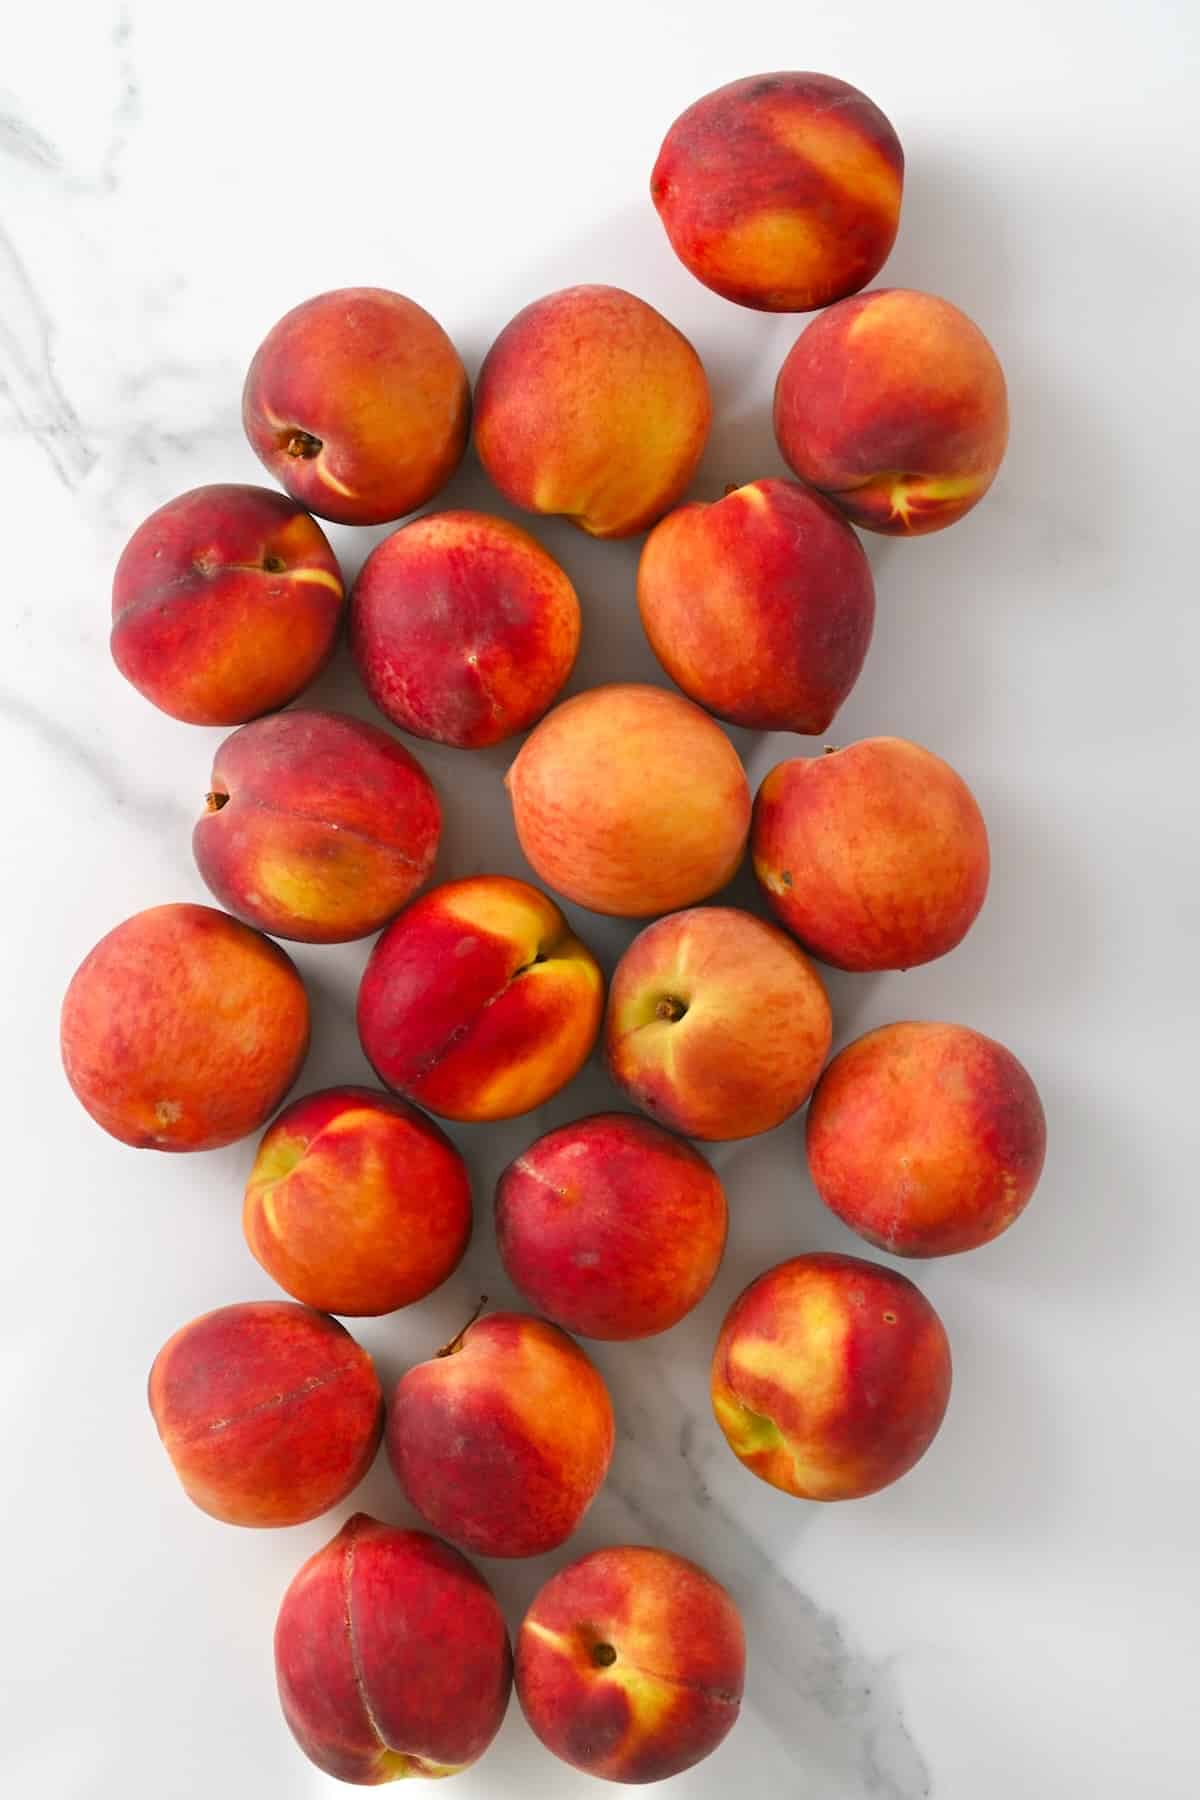 Lots of peaches on a flat surface